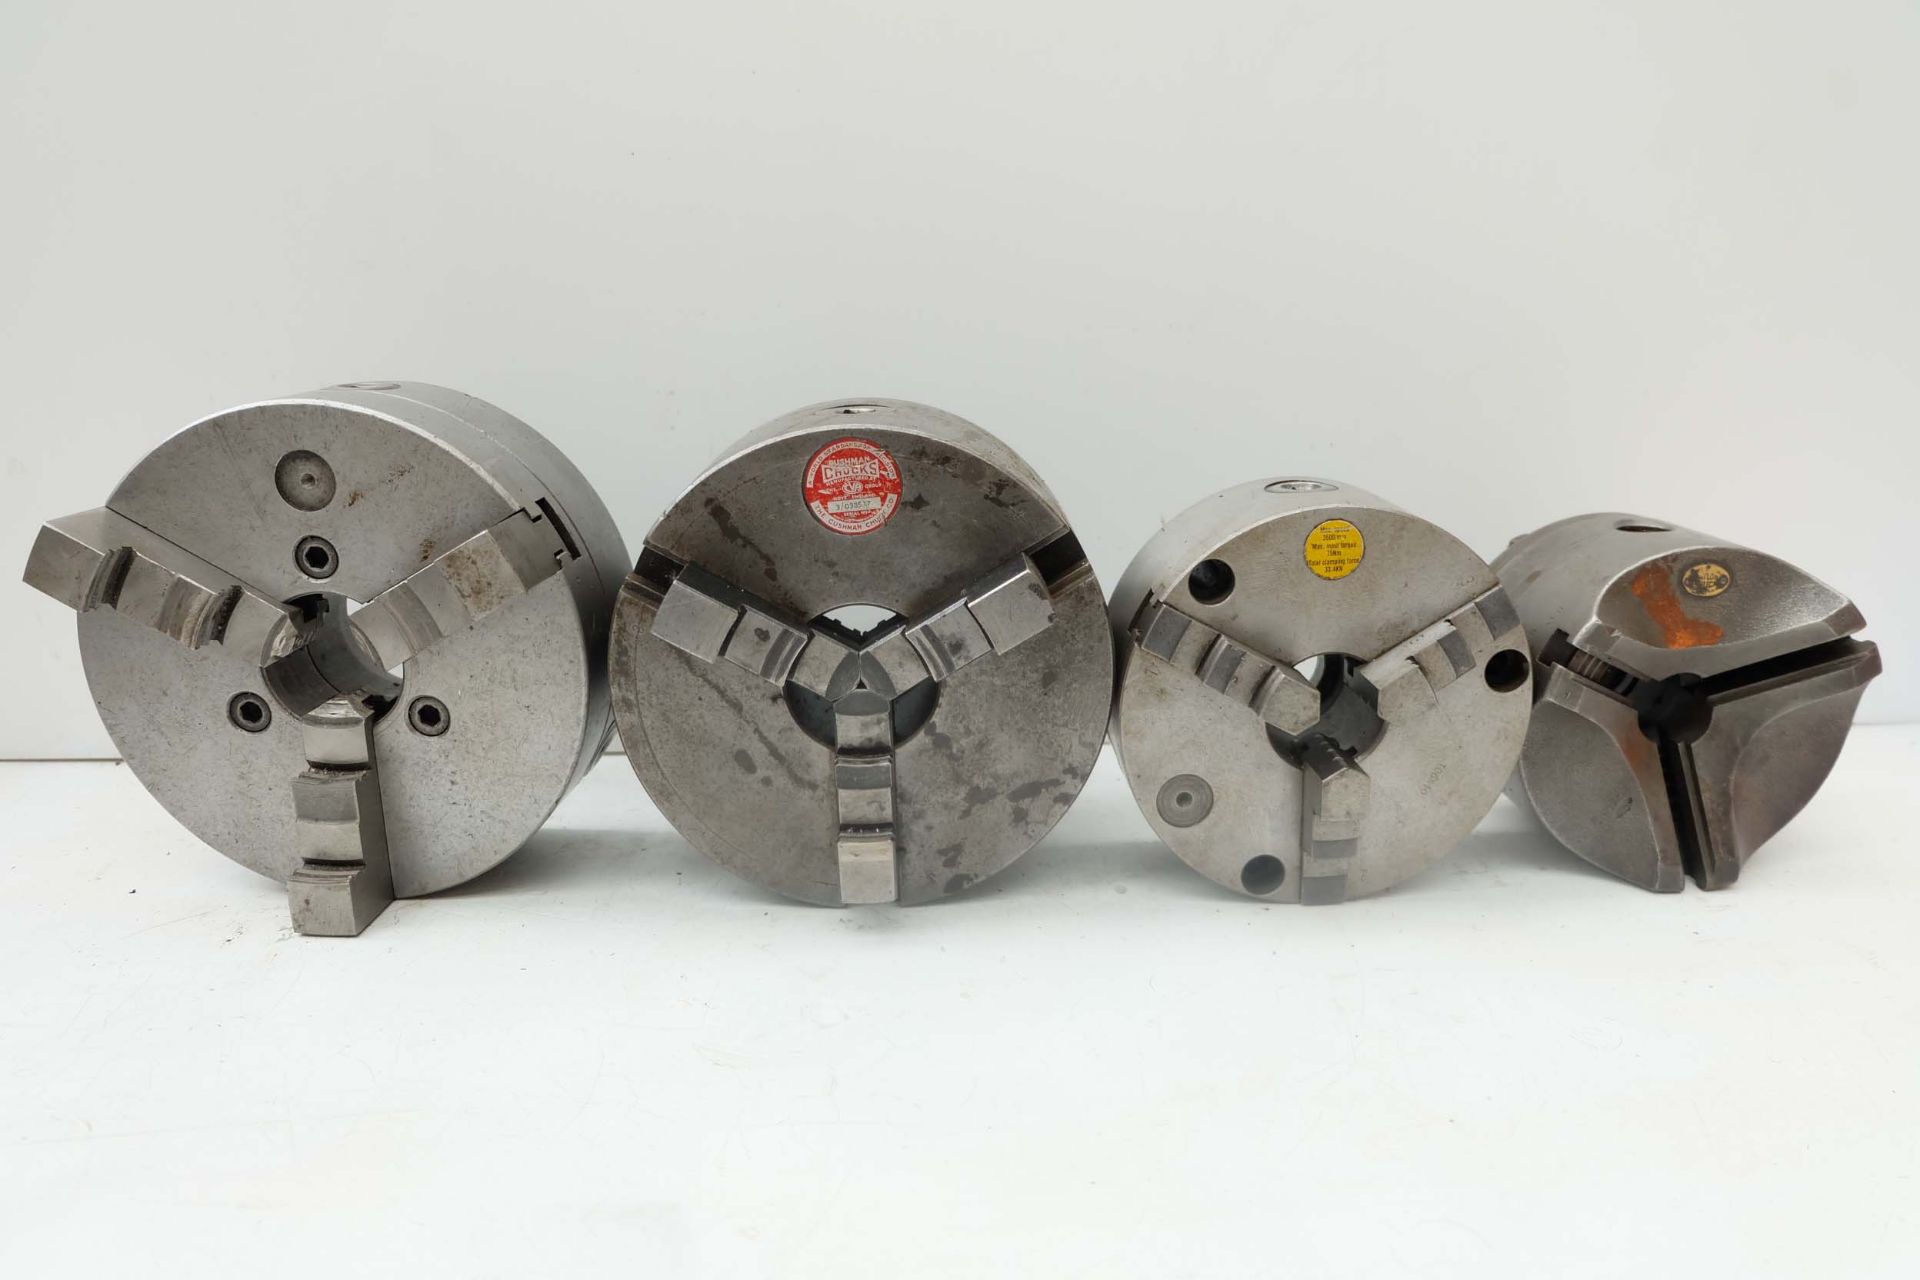 3 x Three Jaw Chucks plus another Without Jaws. 200mm, 160mm, 7 1/2" & 5 1/2" Diameters.